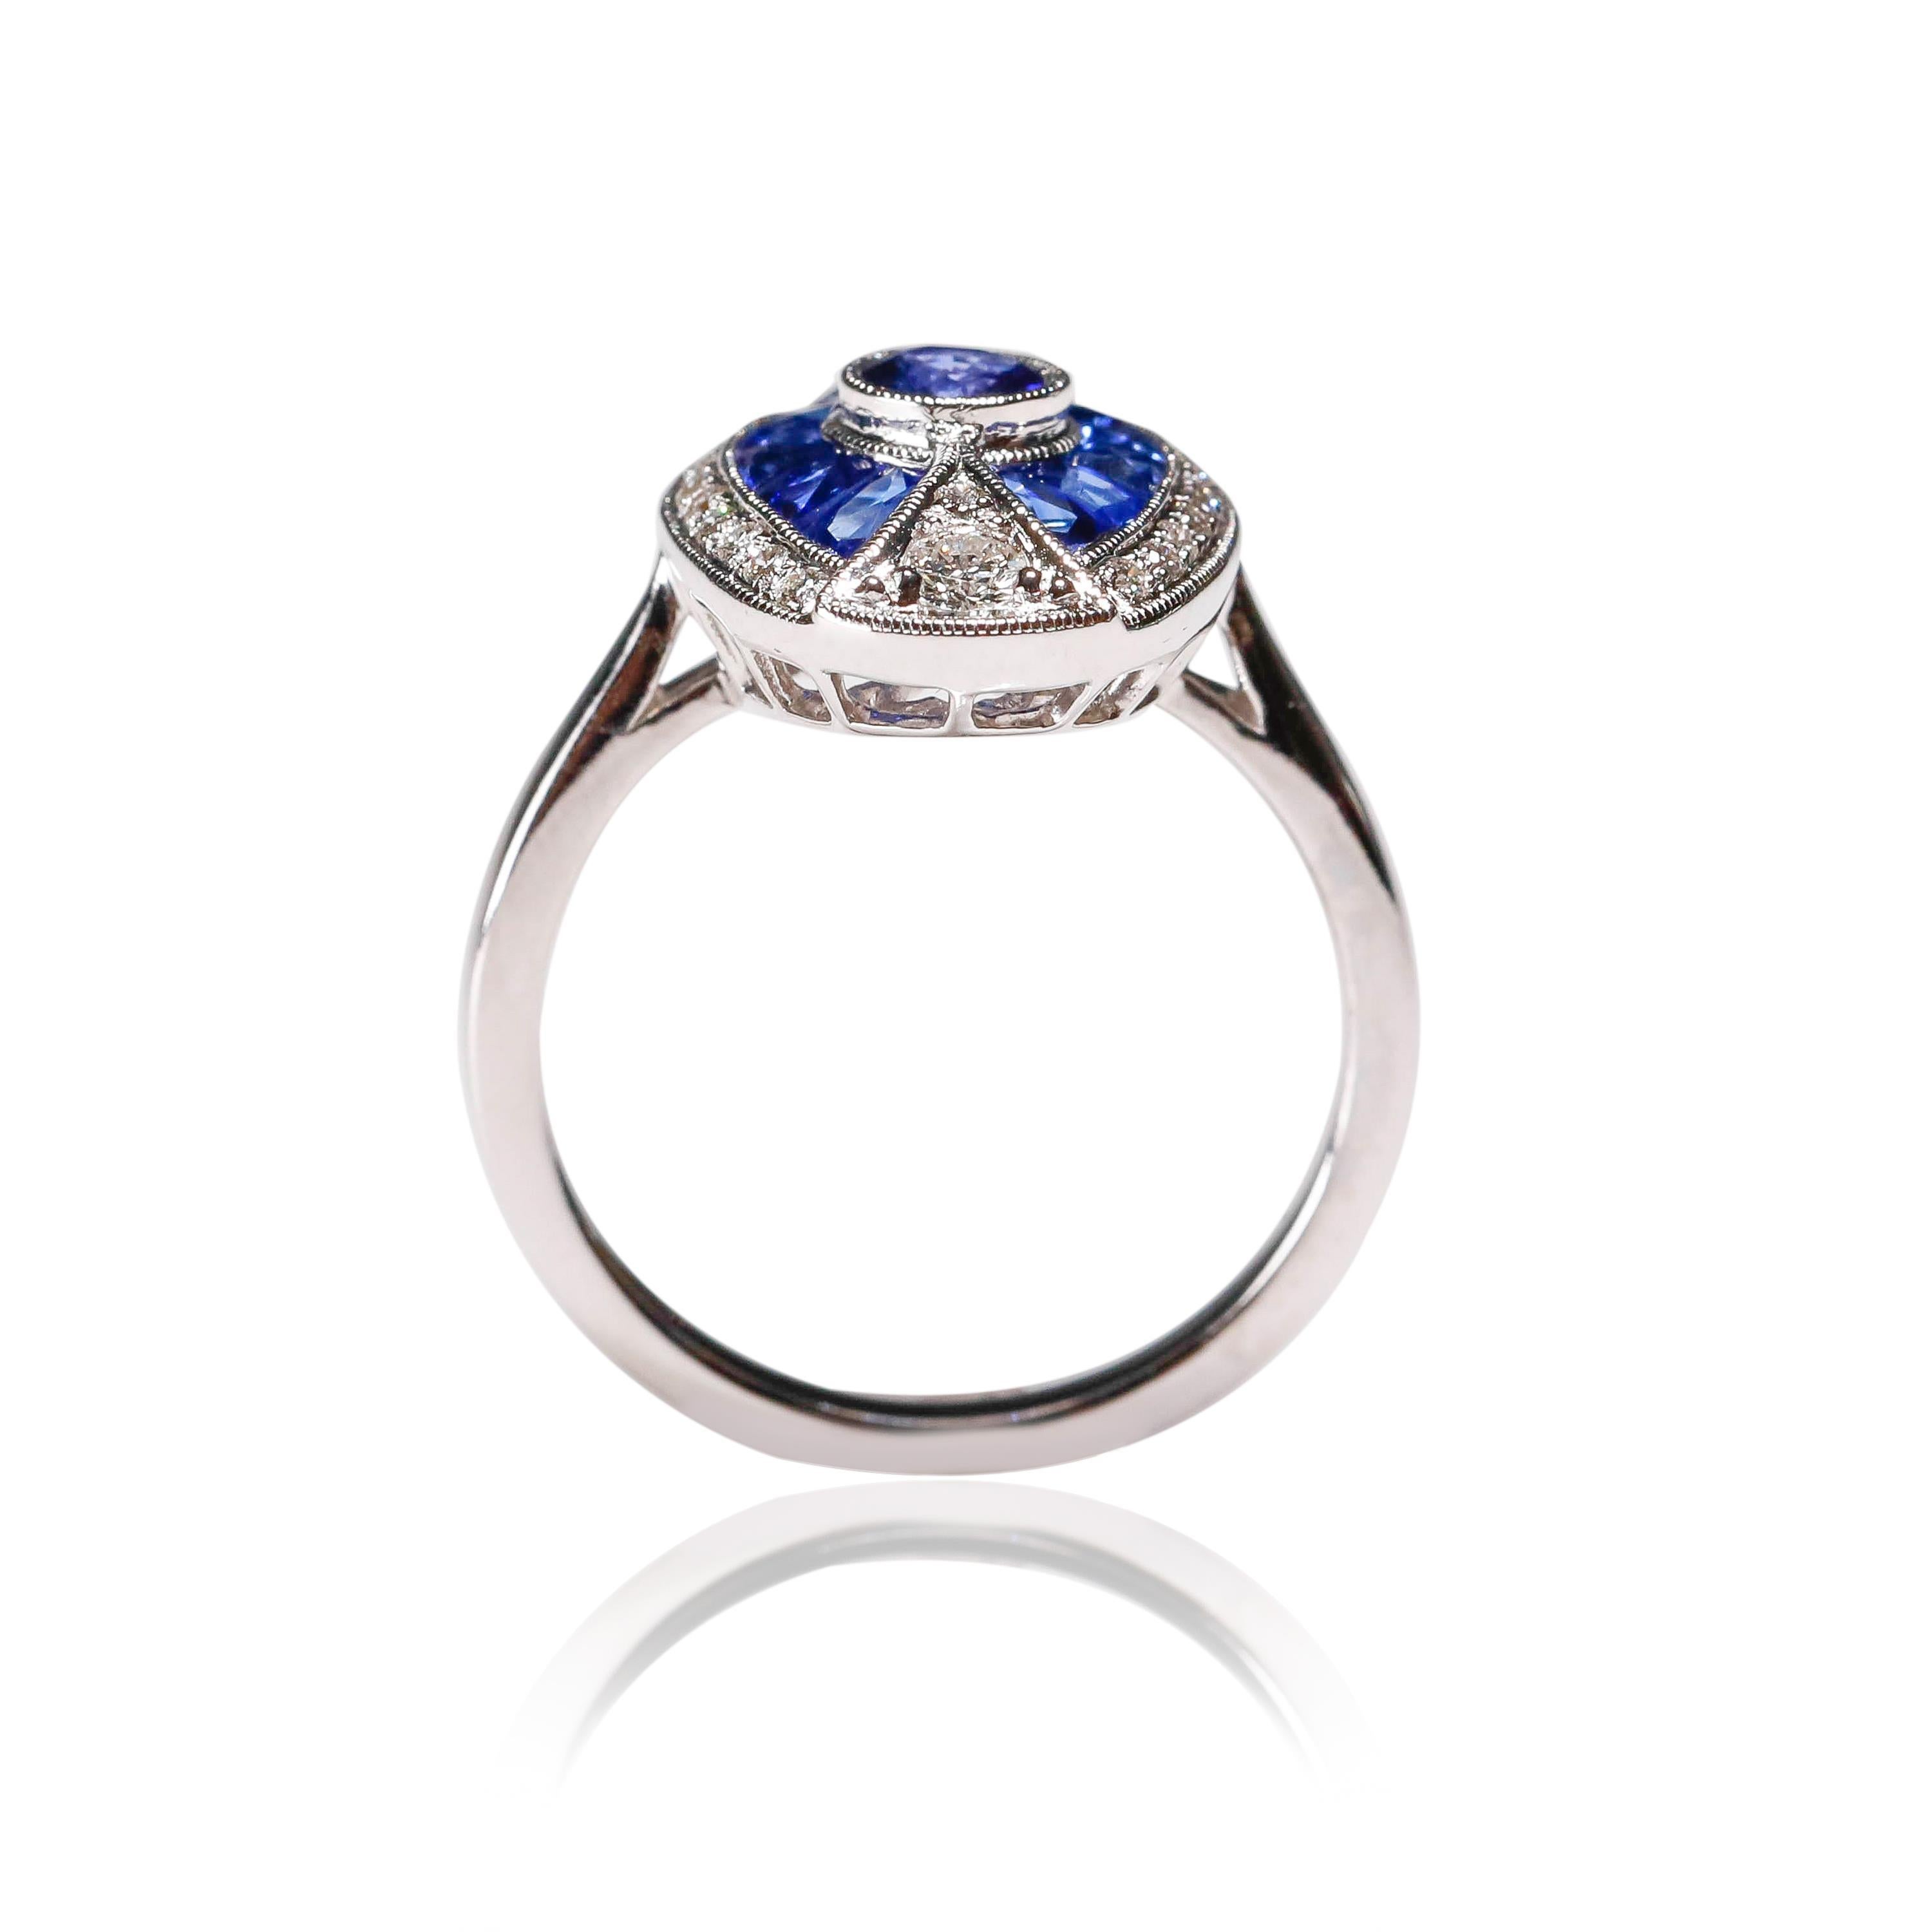 1.70 Ct Blue Sapphire 0.26 Ct Diamond Pave 18 Karat White Gold Oval Ring InStock

Crafted in 18 kt White Gold, this Unique design showcases a Blue Sapphire 1.70 TCW, set in a halo of round-cut mesmerizing diamonds, Polished to a brilliant